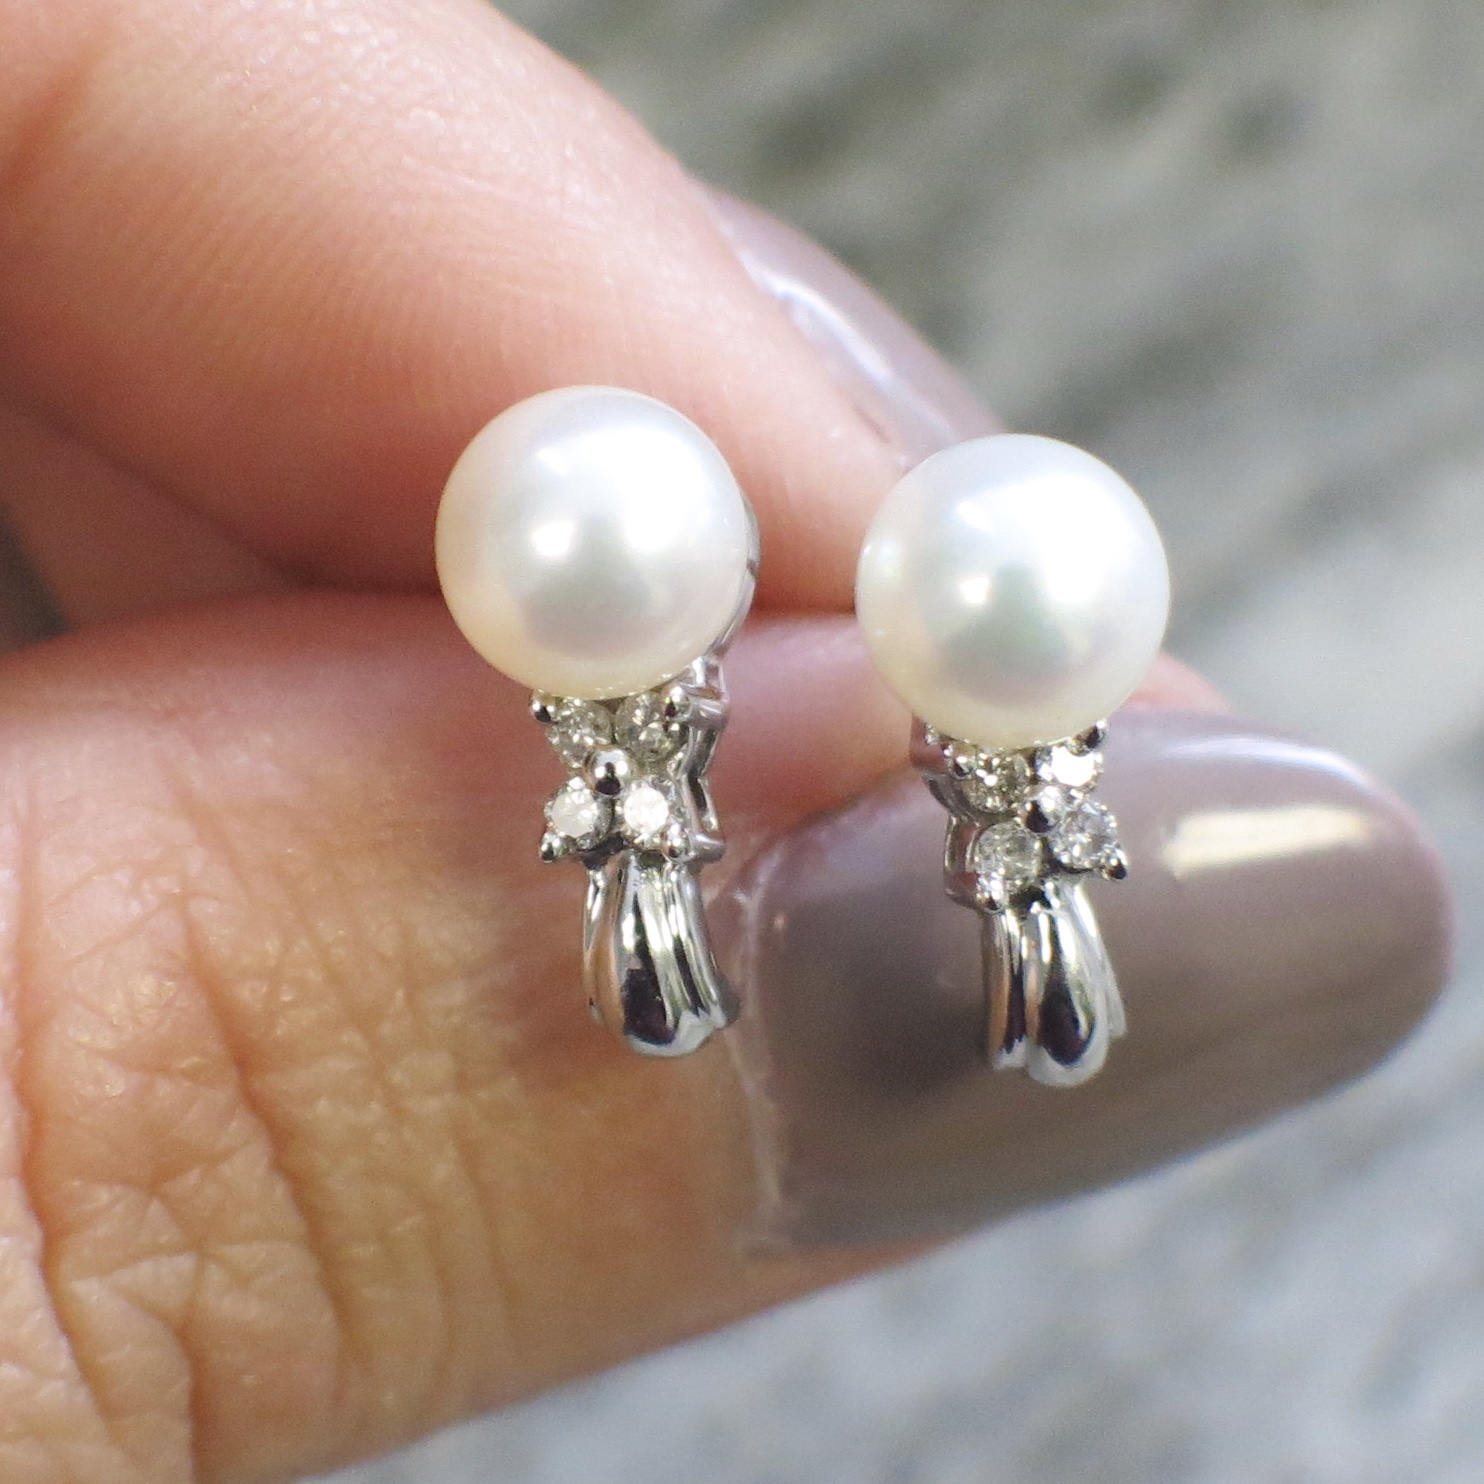 Pearl Earrings - AAA 7mm Black Cultured Pearls on 9ct Gold Posts